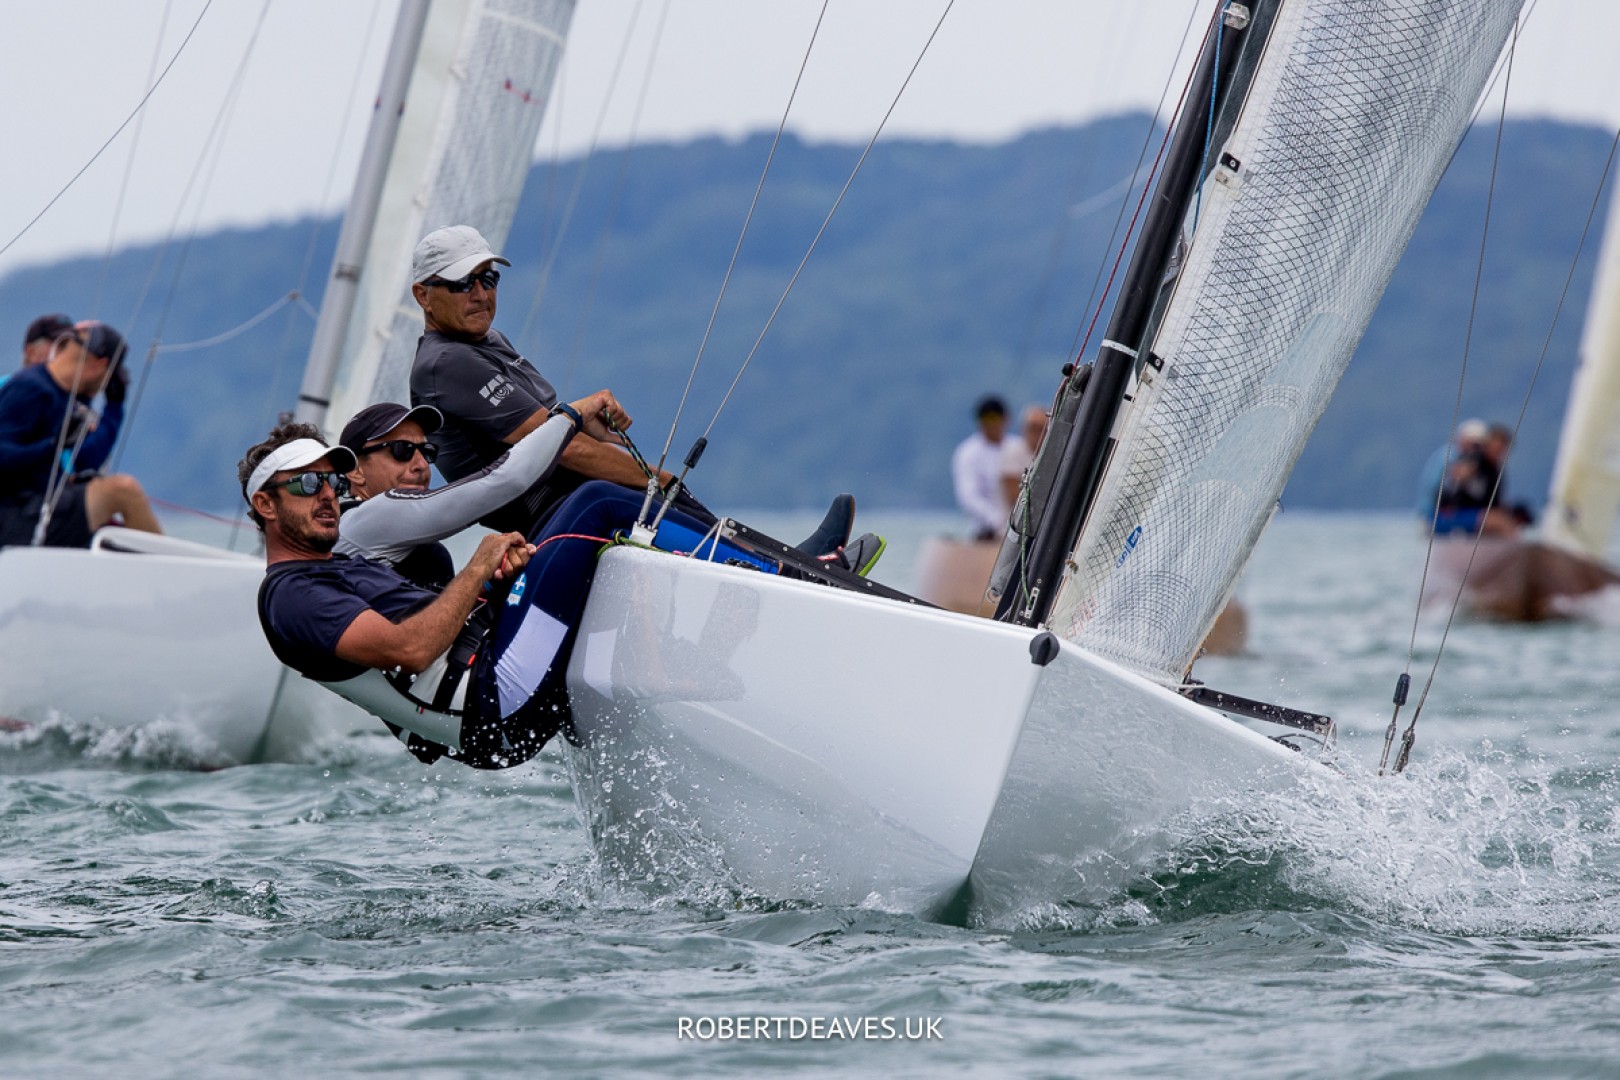 Melx III leads 5.5 Metre German Open at Tutzing after stormy first day